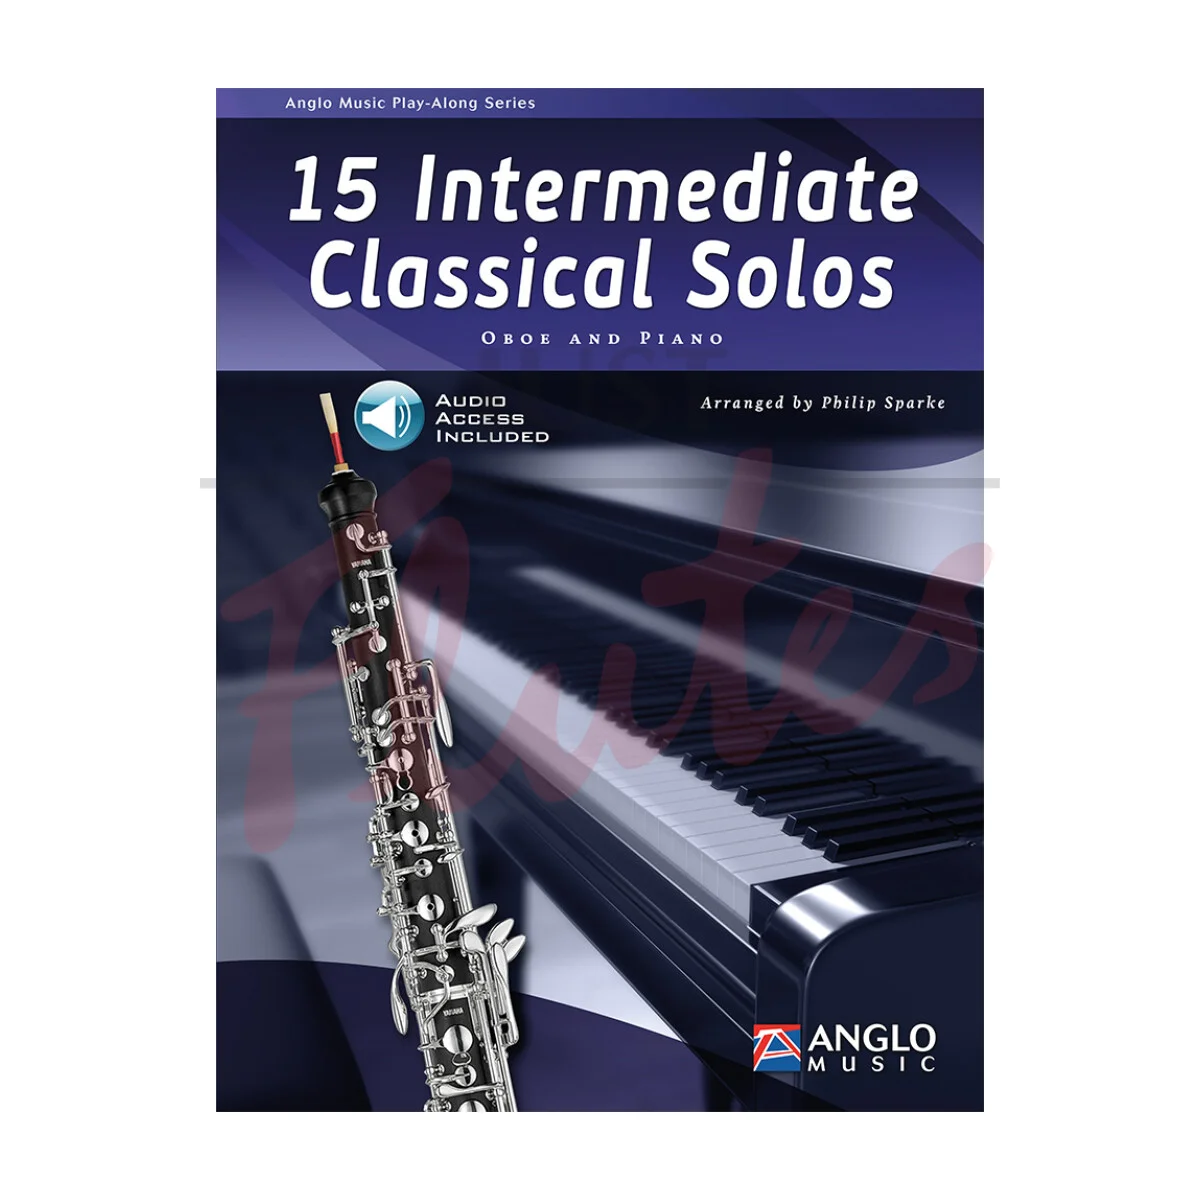 15 Intermediate Classical Solos for Oboe and Piano